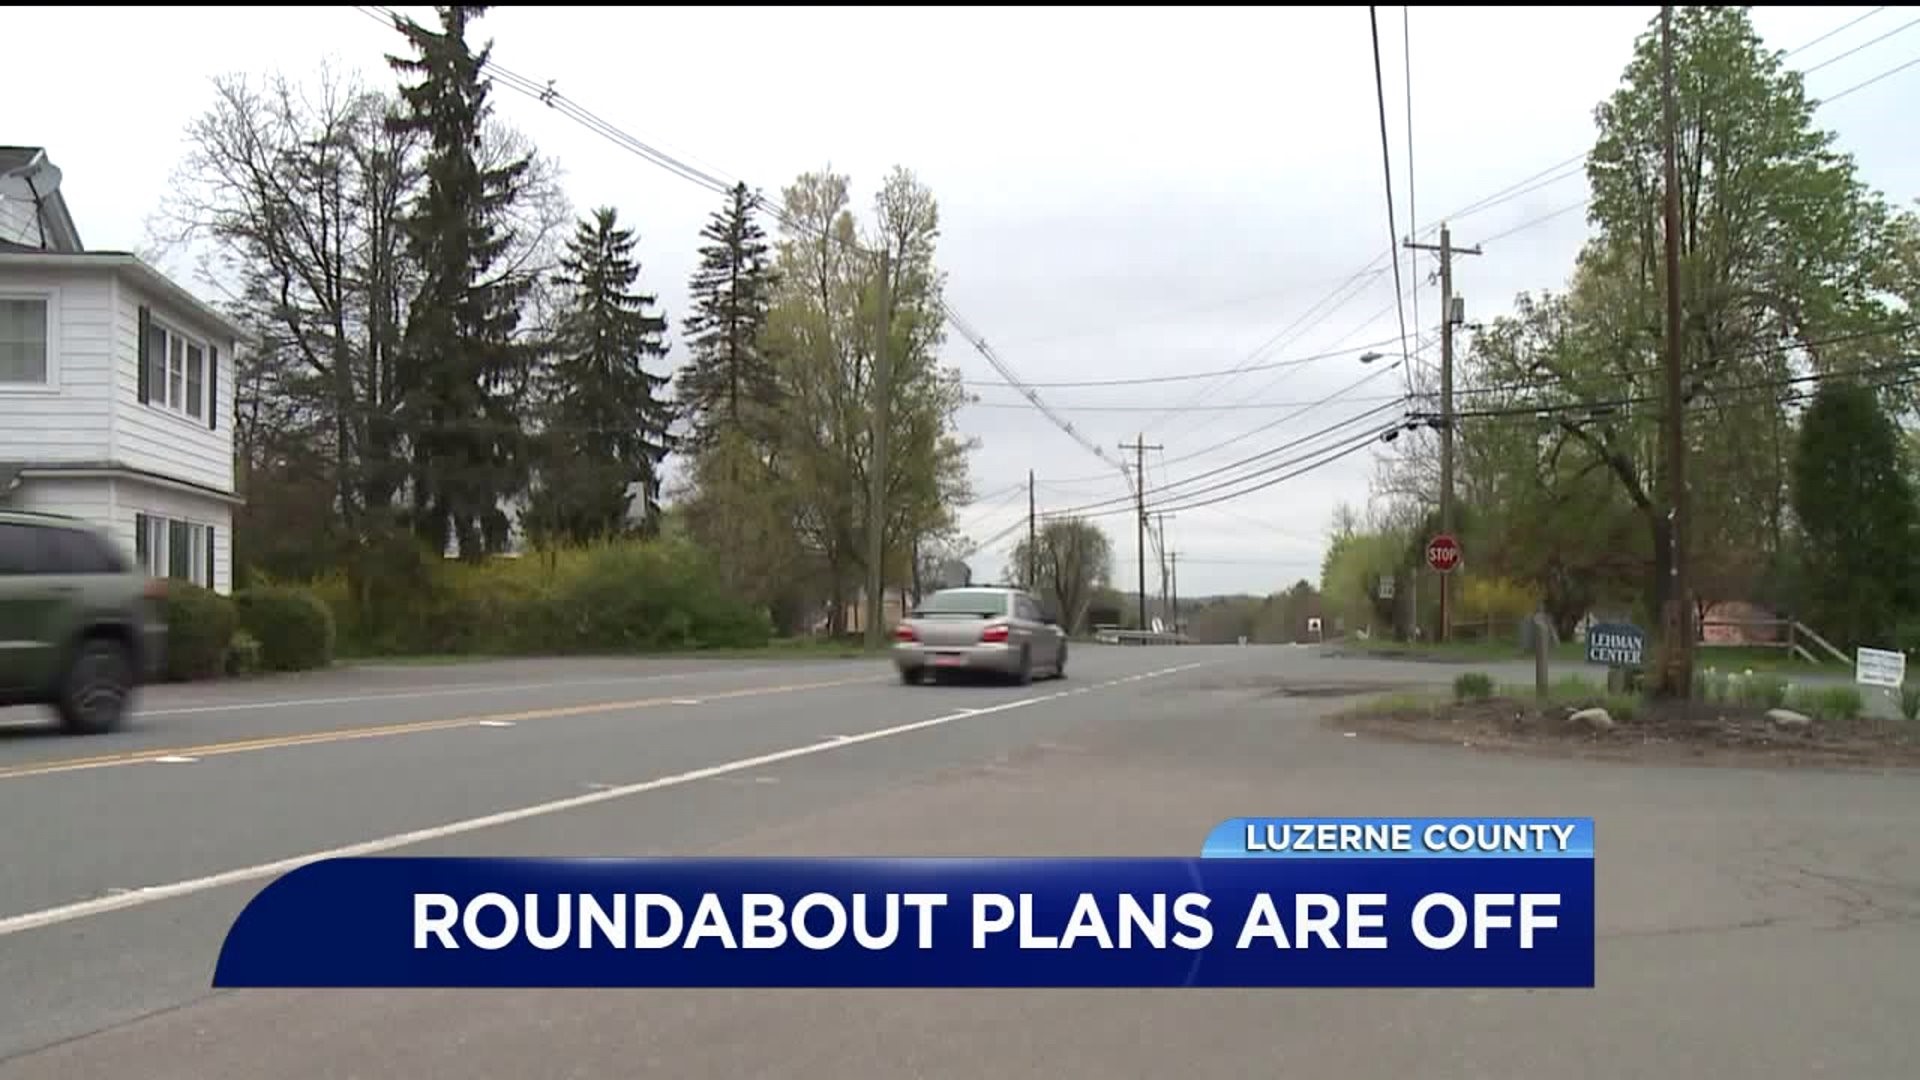 PennDOT: No More Plans for Roundabout in Lehman Township